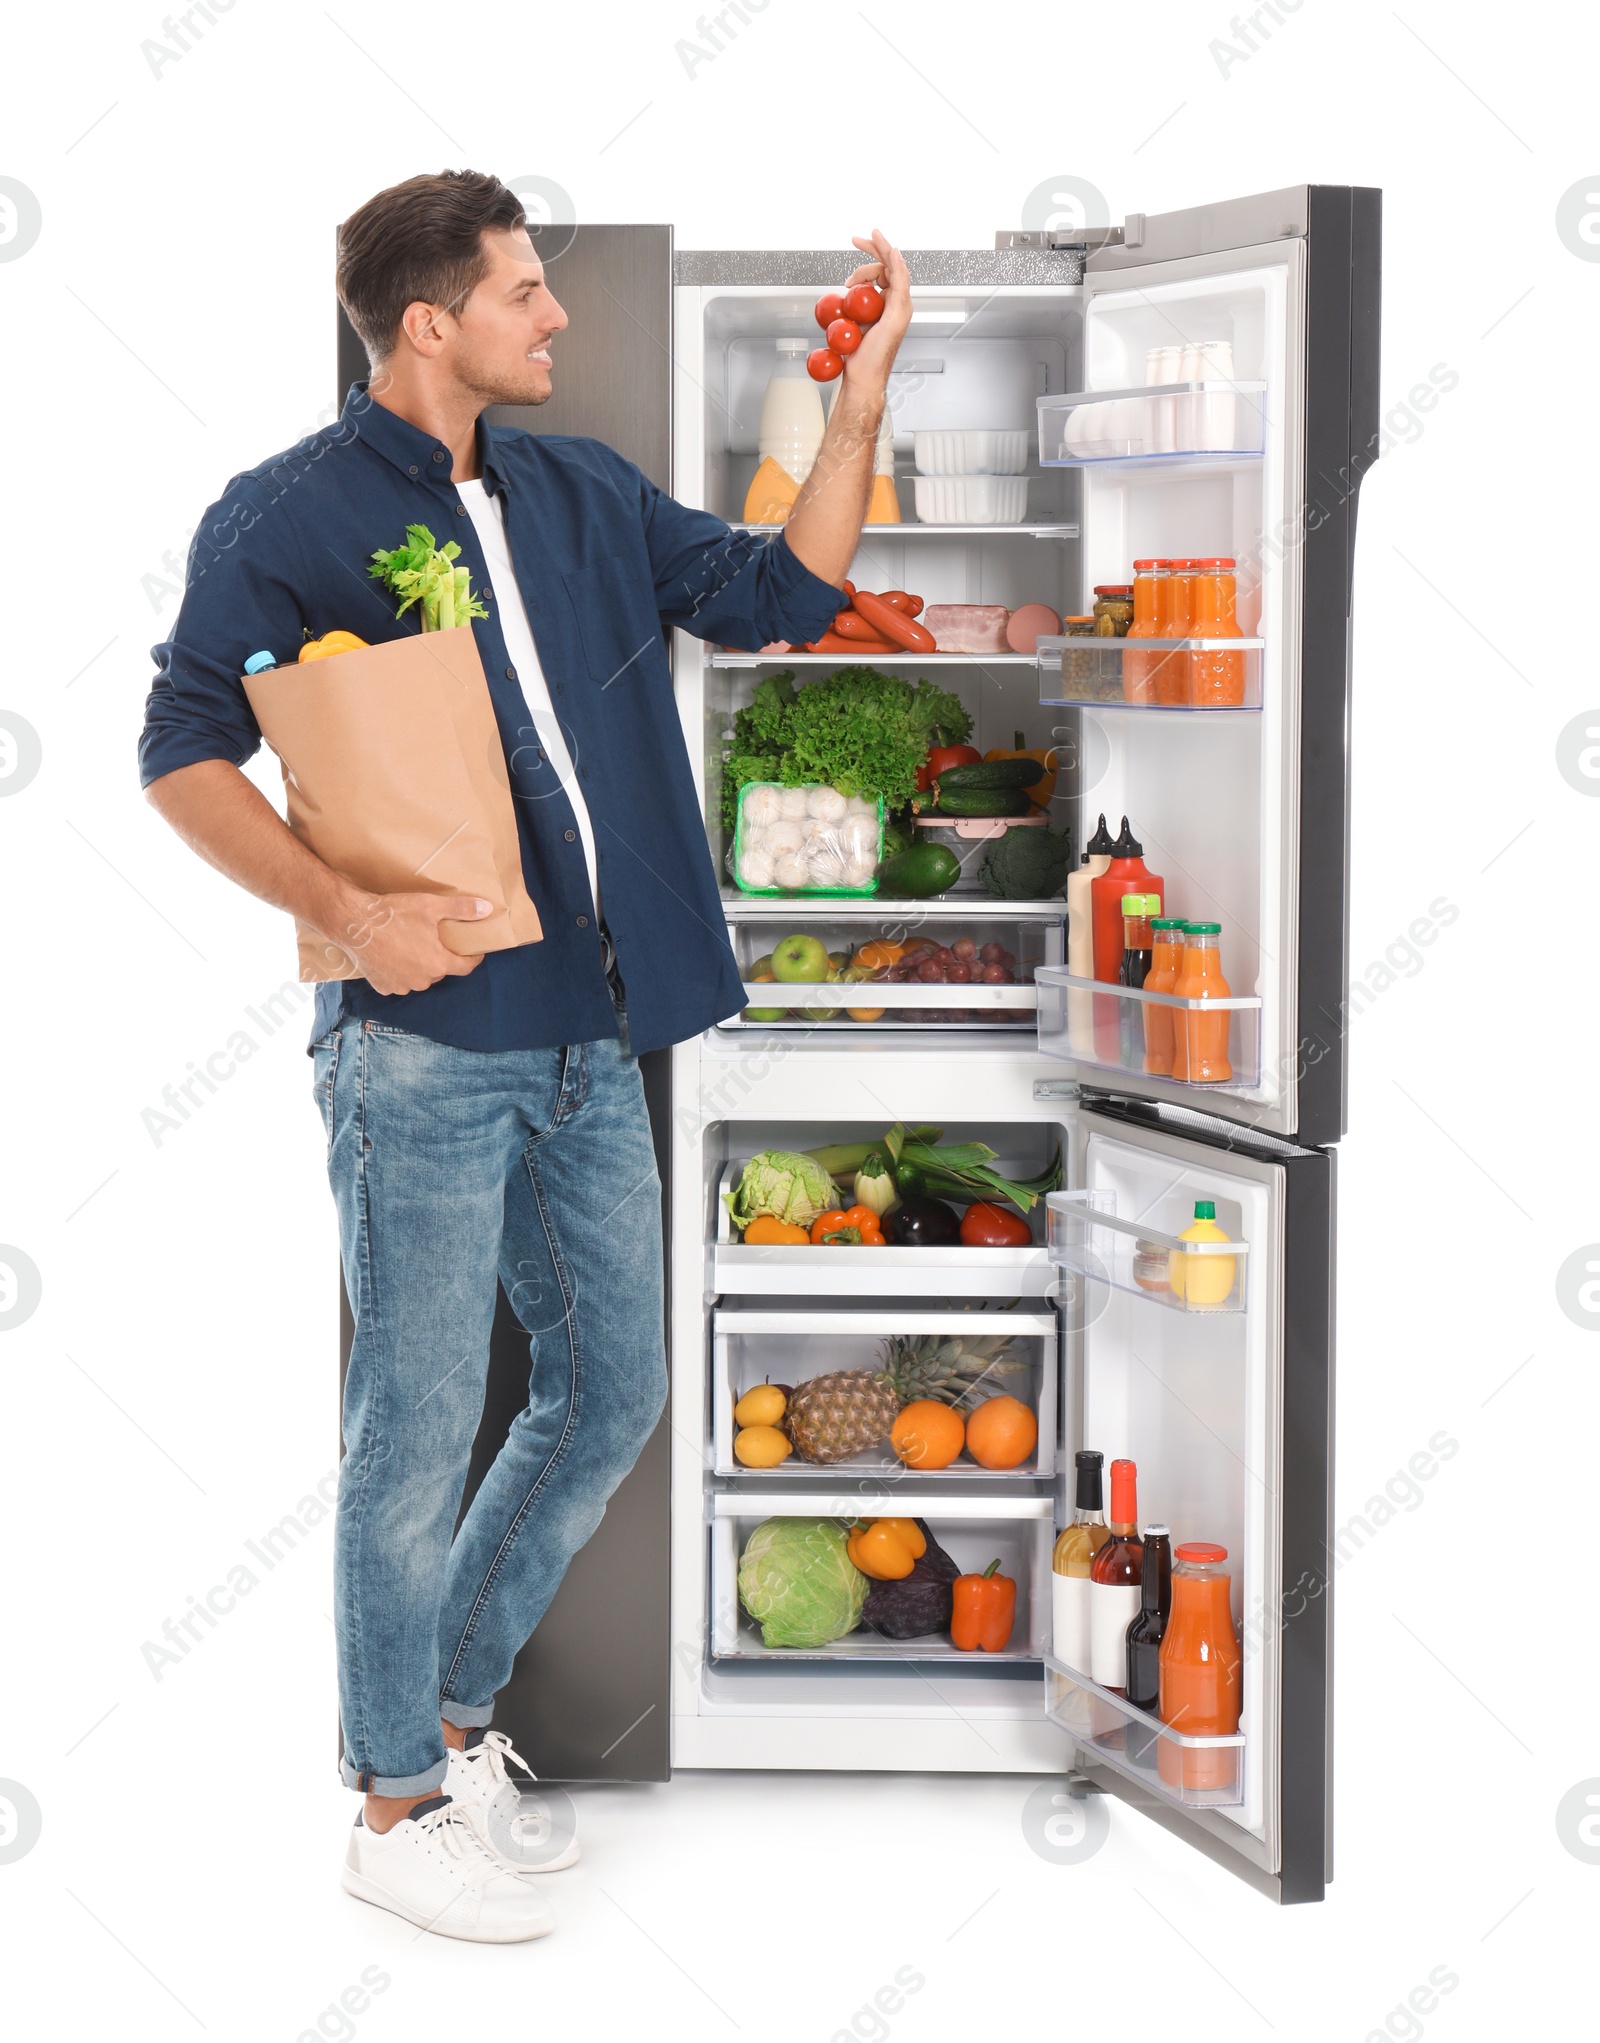 Photo of Man with bag of groceries and tomatoes near open refrigerator on white background